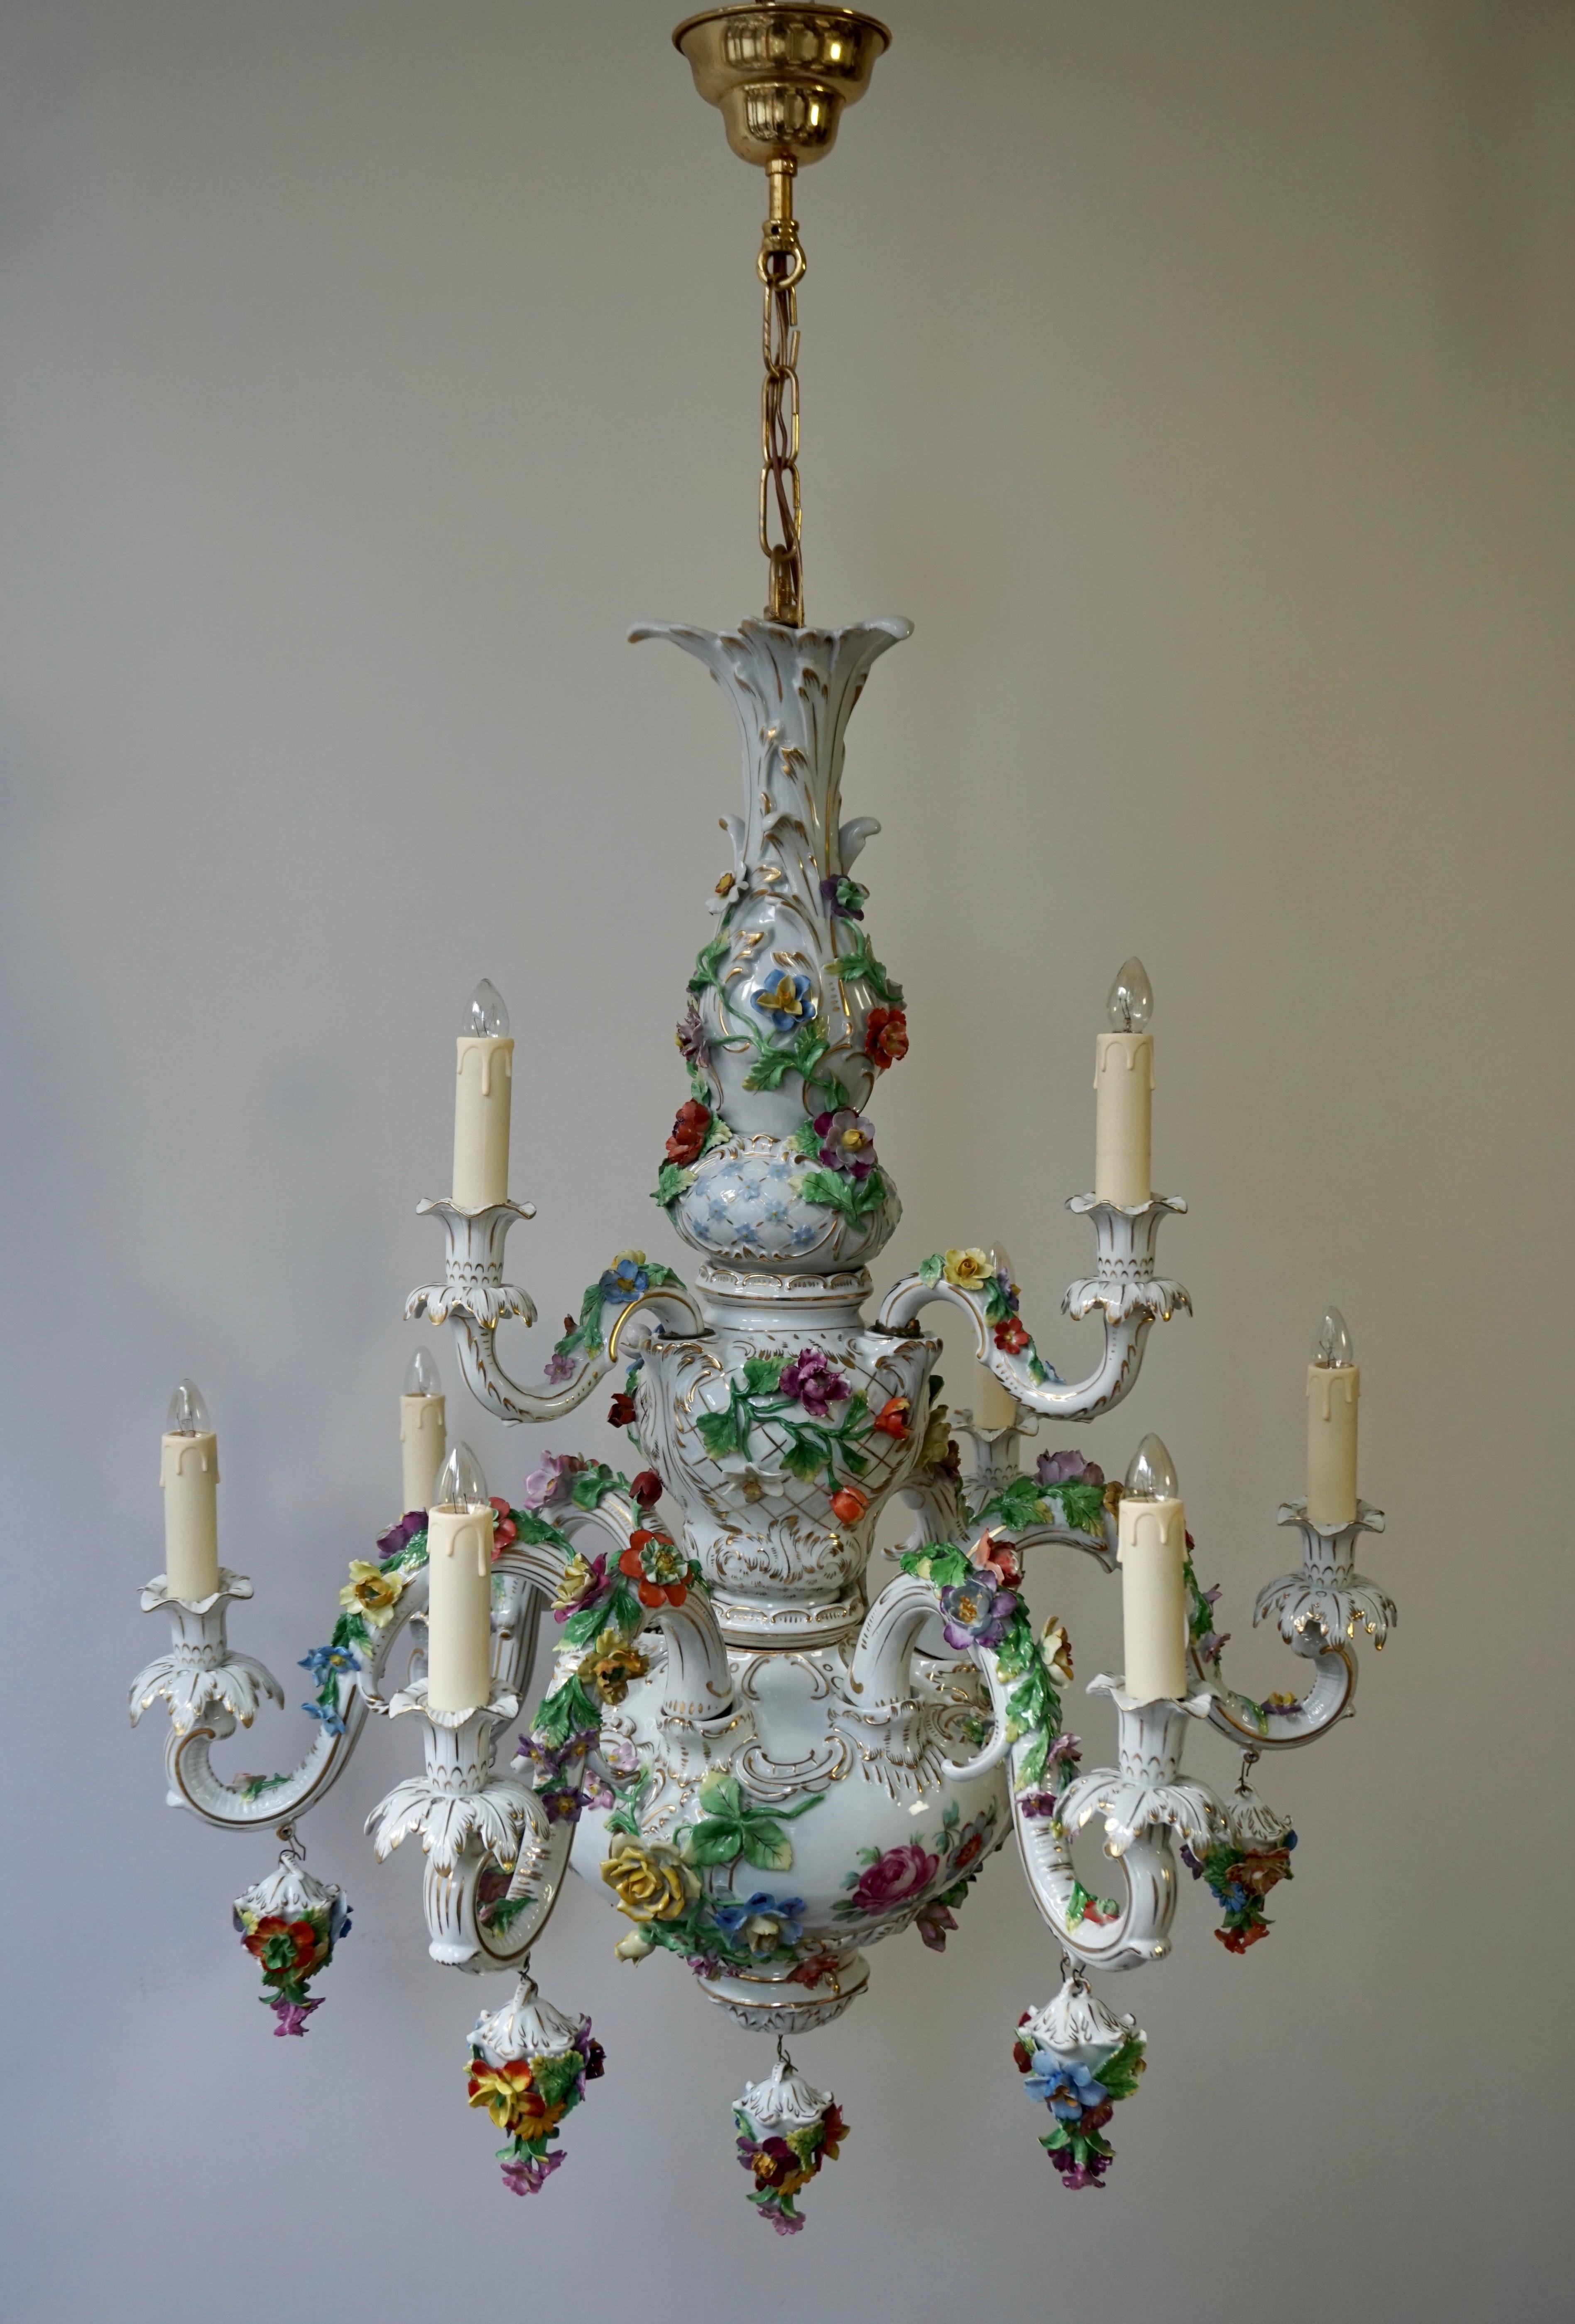 Gilt Spectacular Large Italian Rococo Style Porcelain Floral Chandelier For Sale